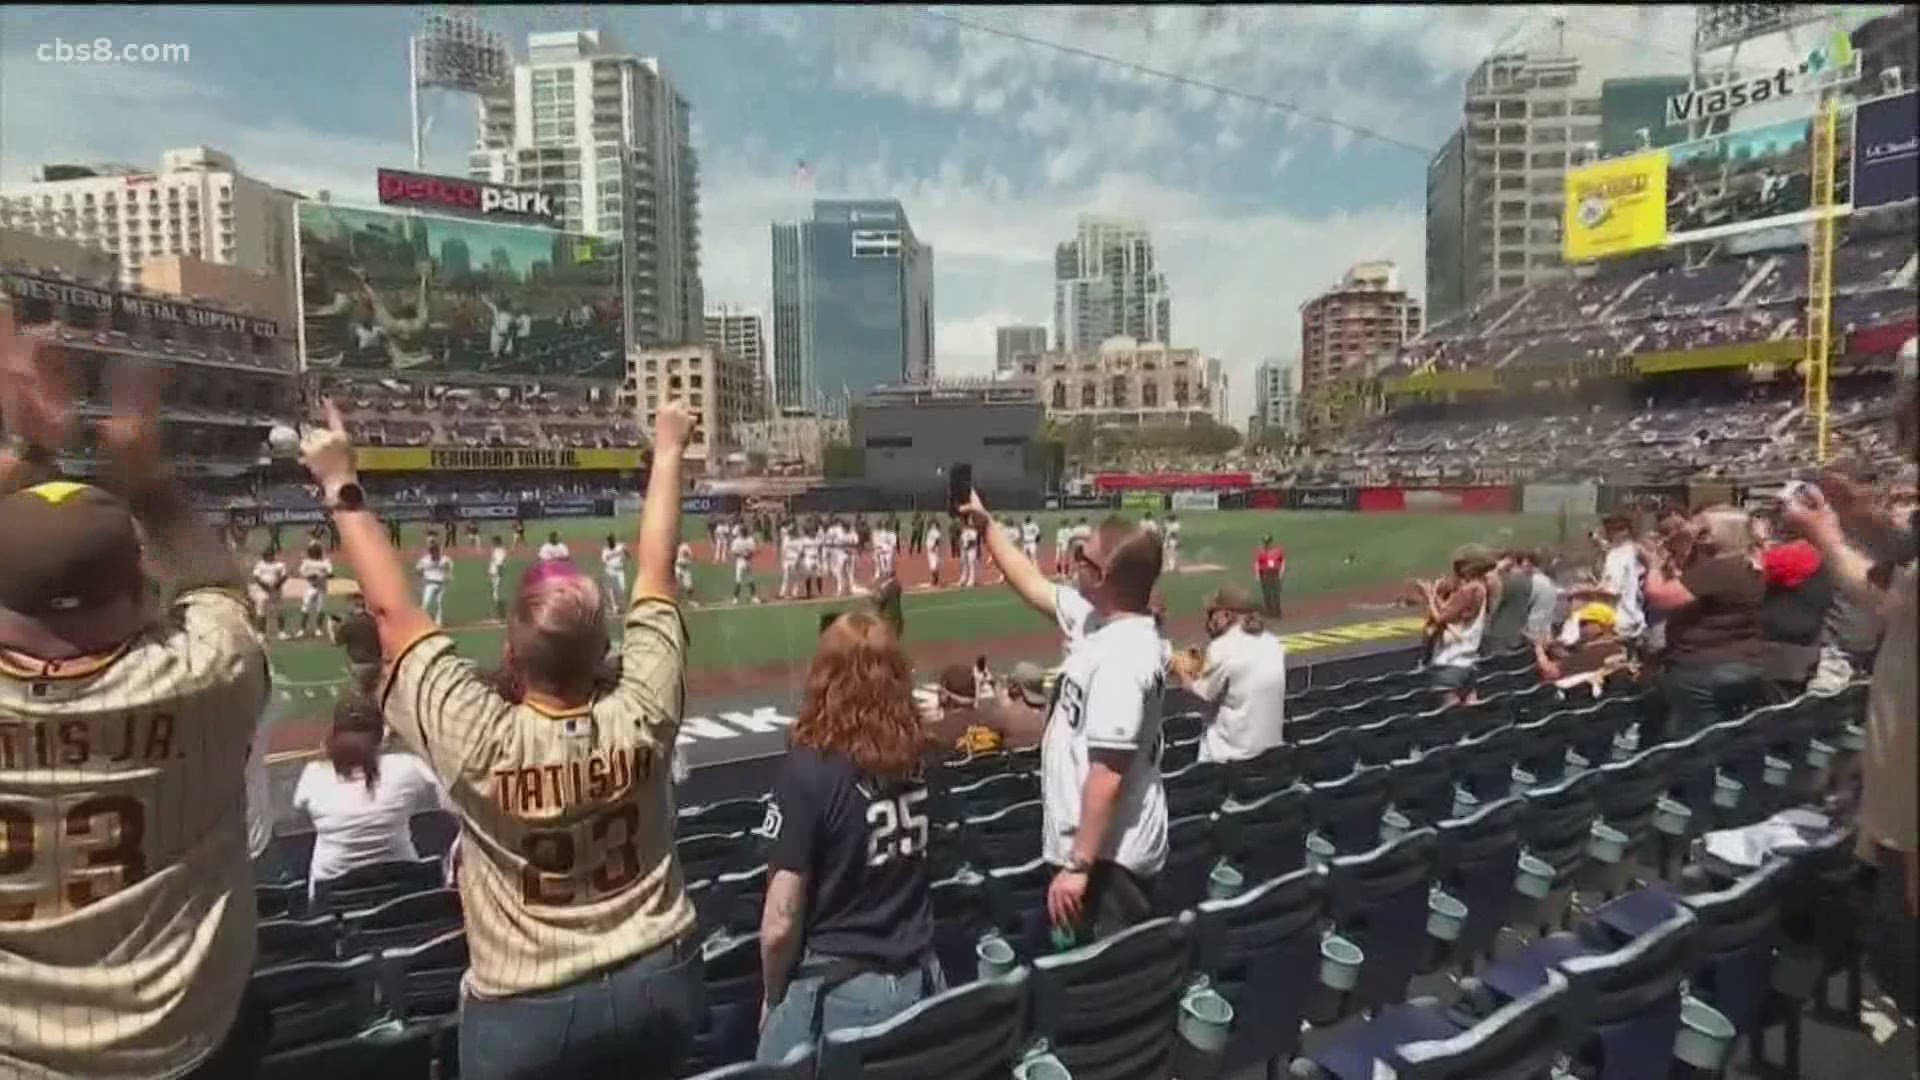 Padres Announce Orange Tier Updates at Petco Park, by FriarWire